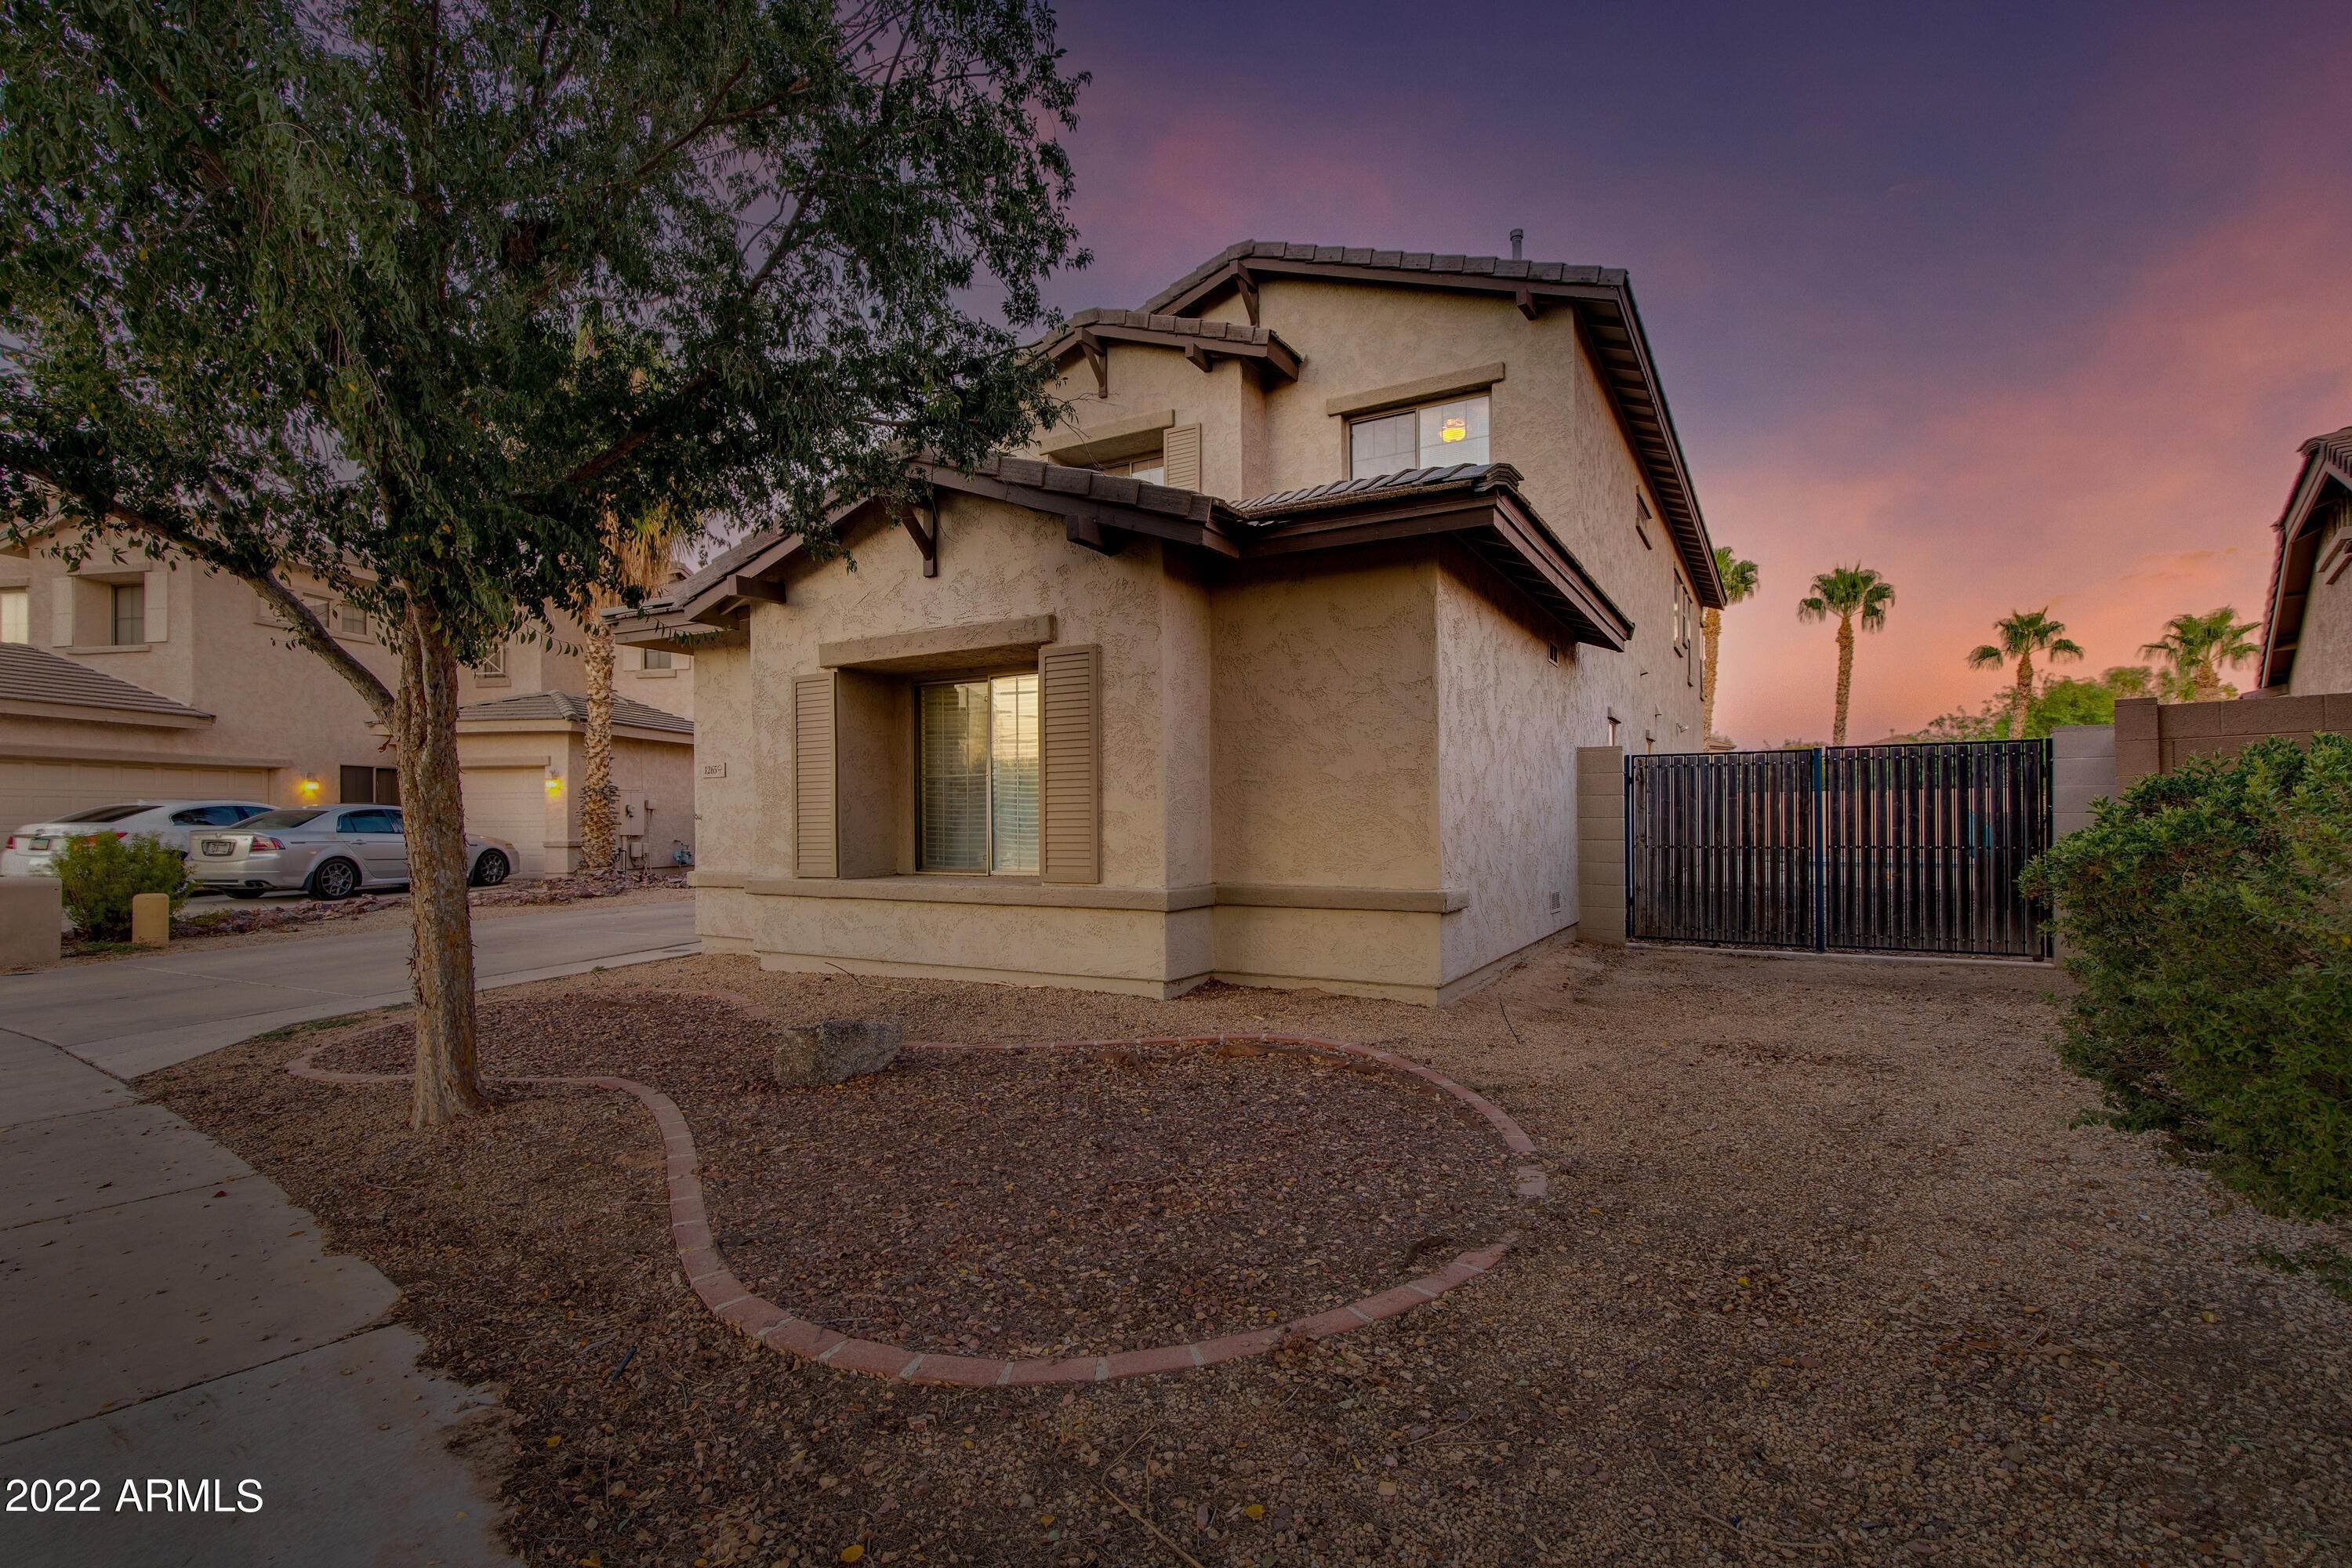 49. Single Family for Sale at Goodyear, AZ 85338